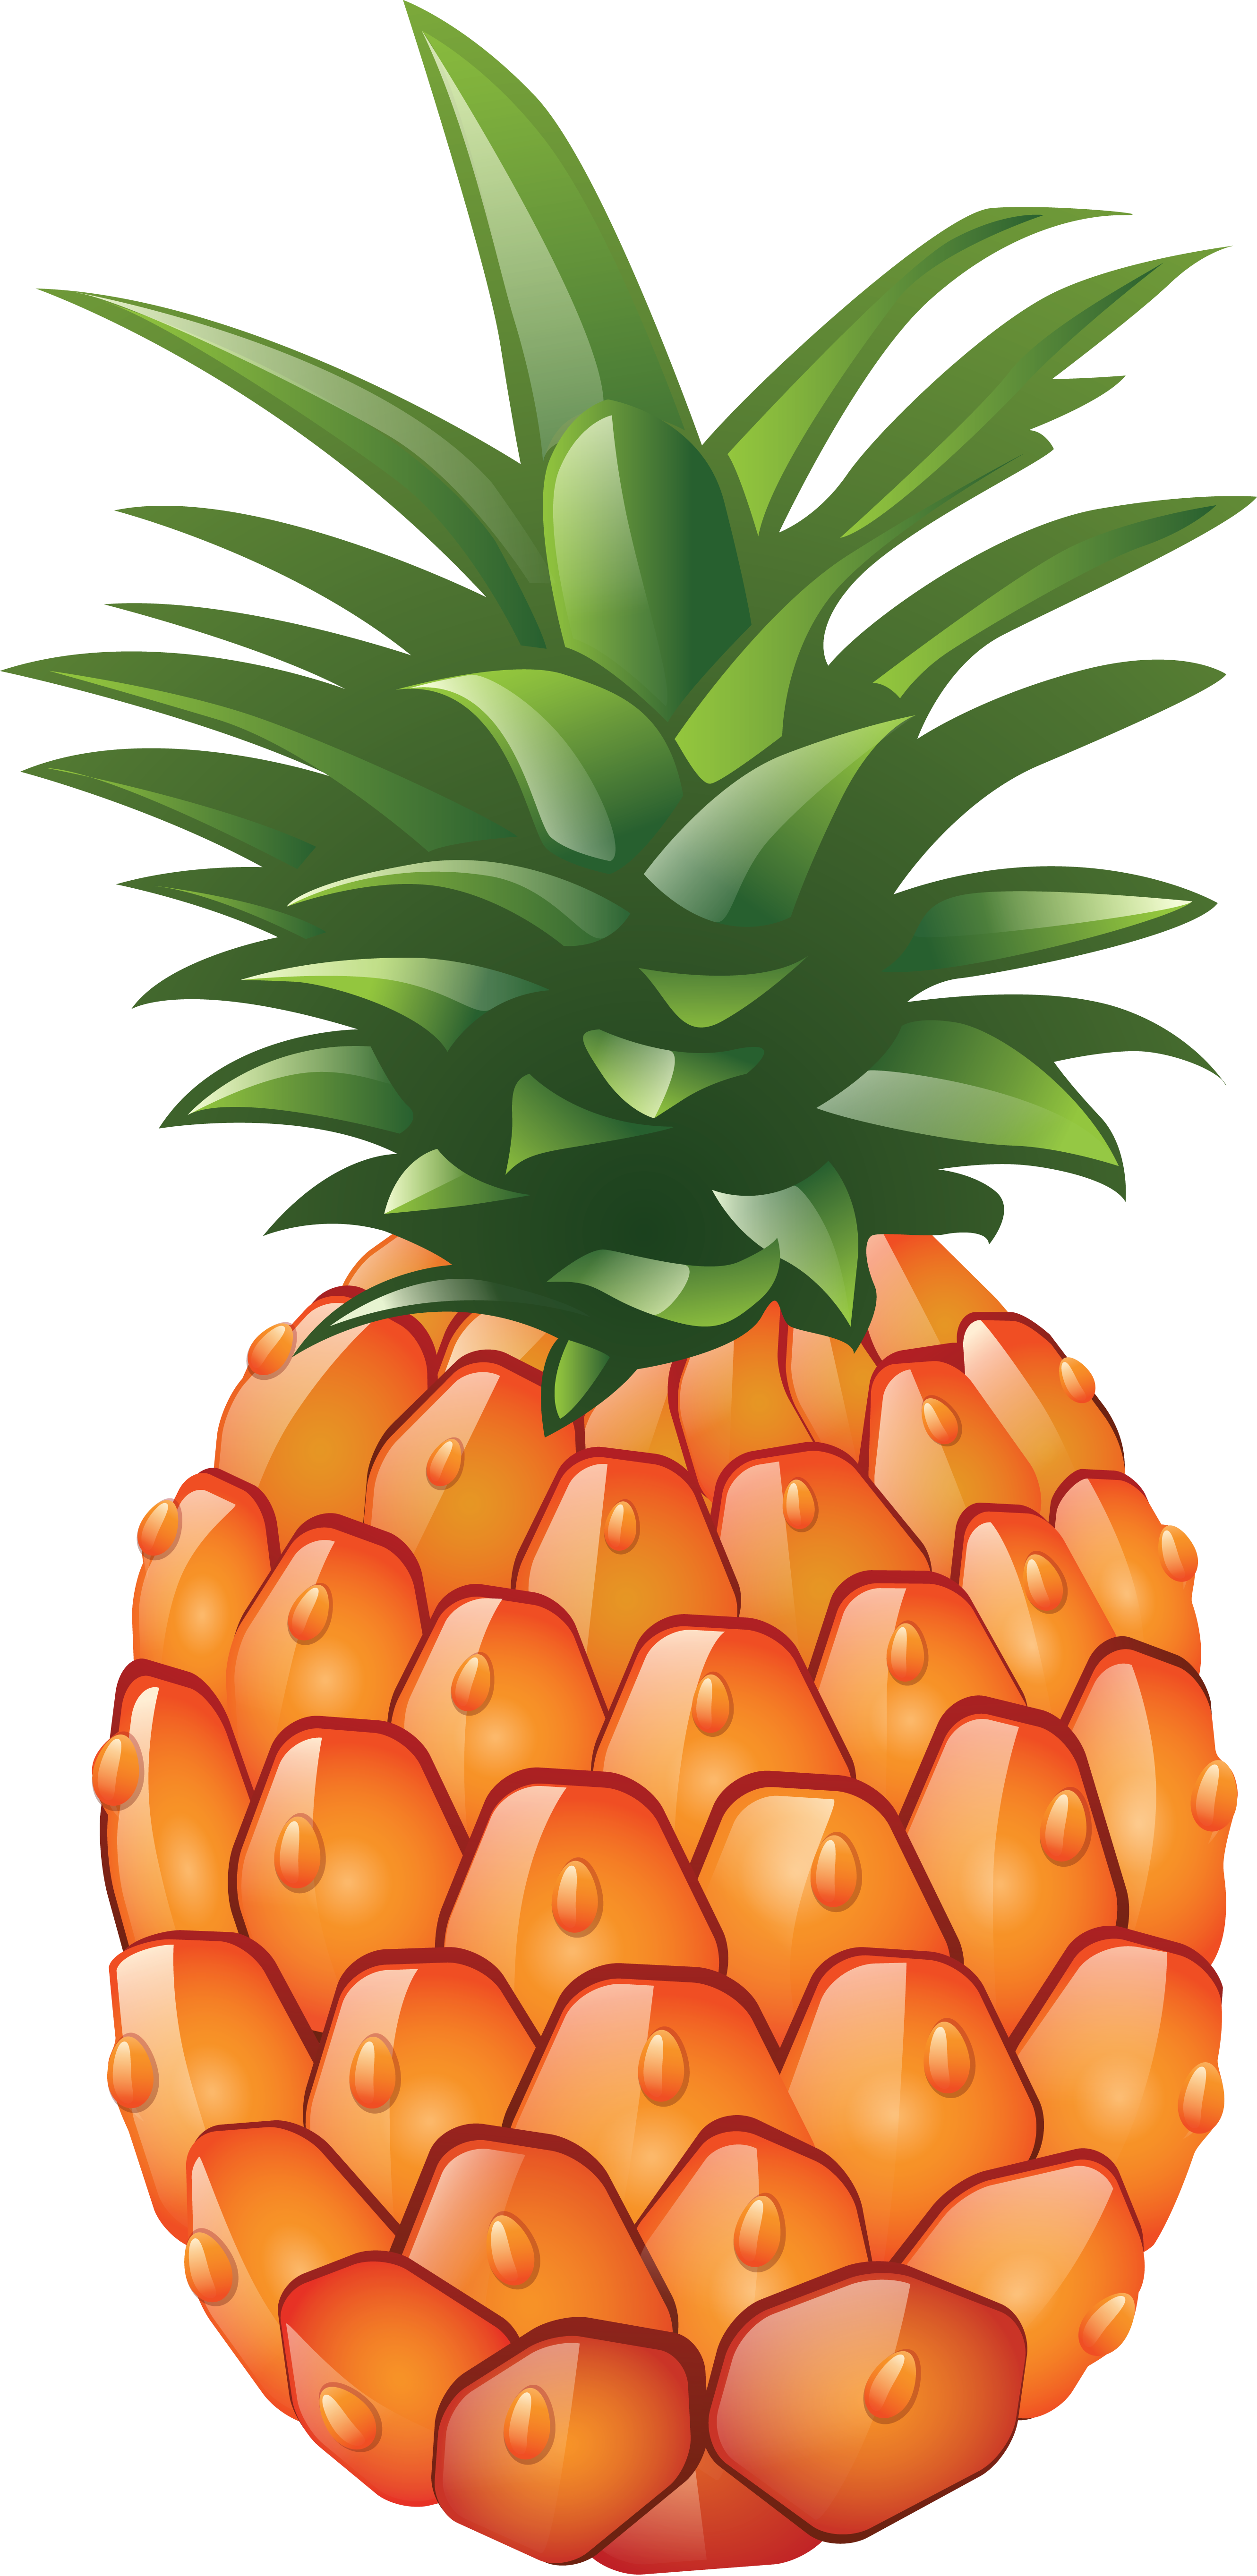 Pineapple images free pictures download clipart 2